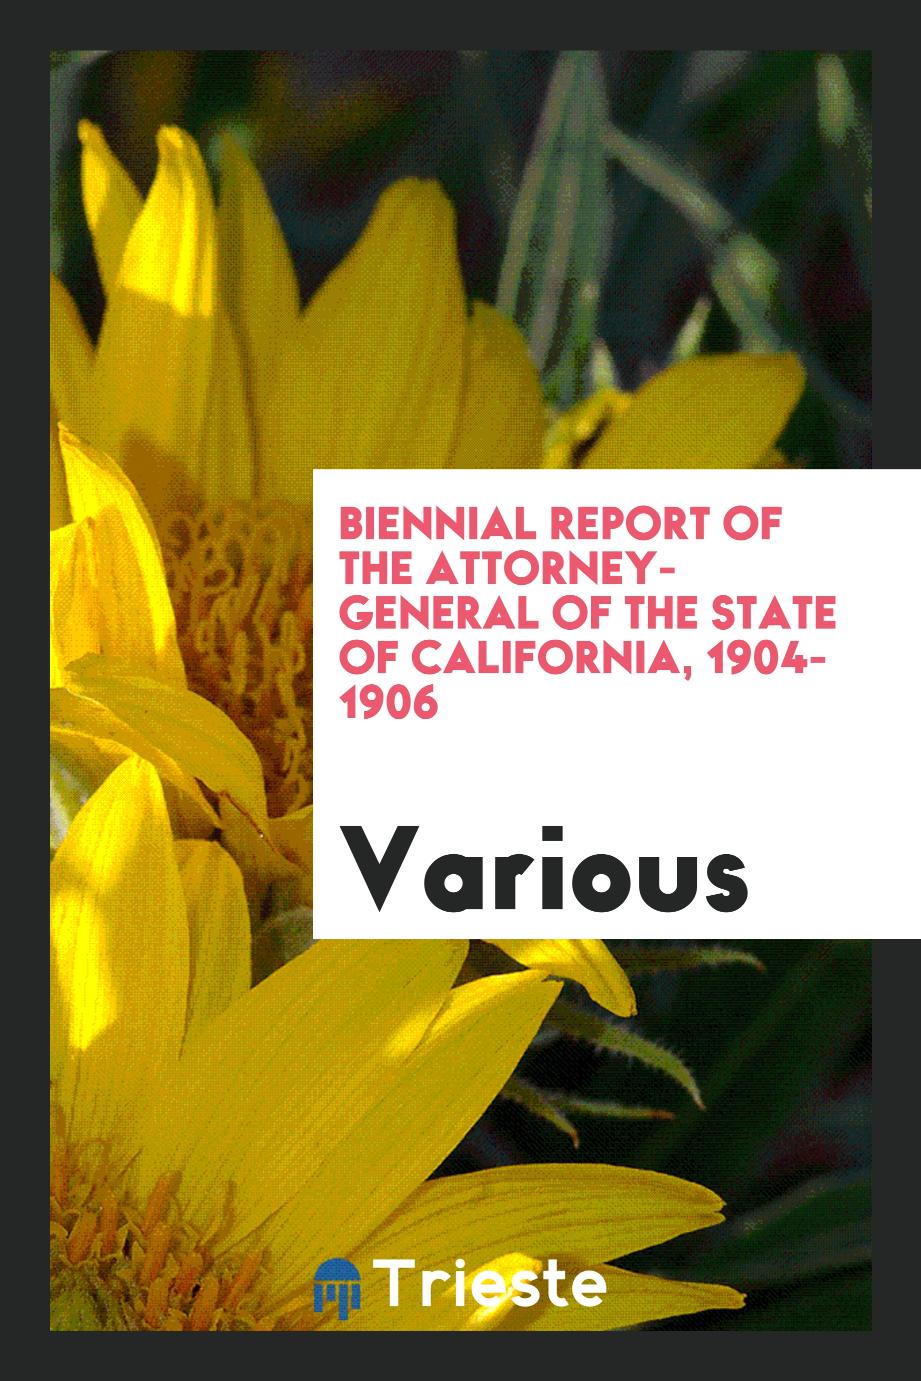 Biennial Report of the attorney-general of the State of California, 1904-1906